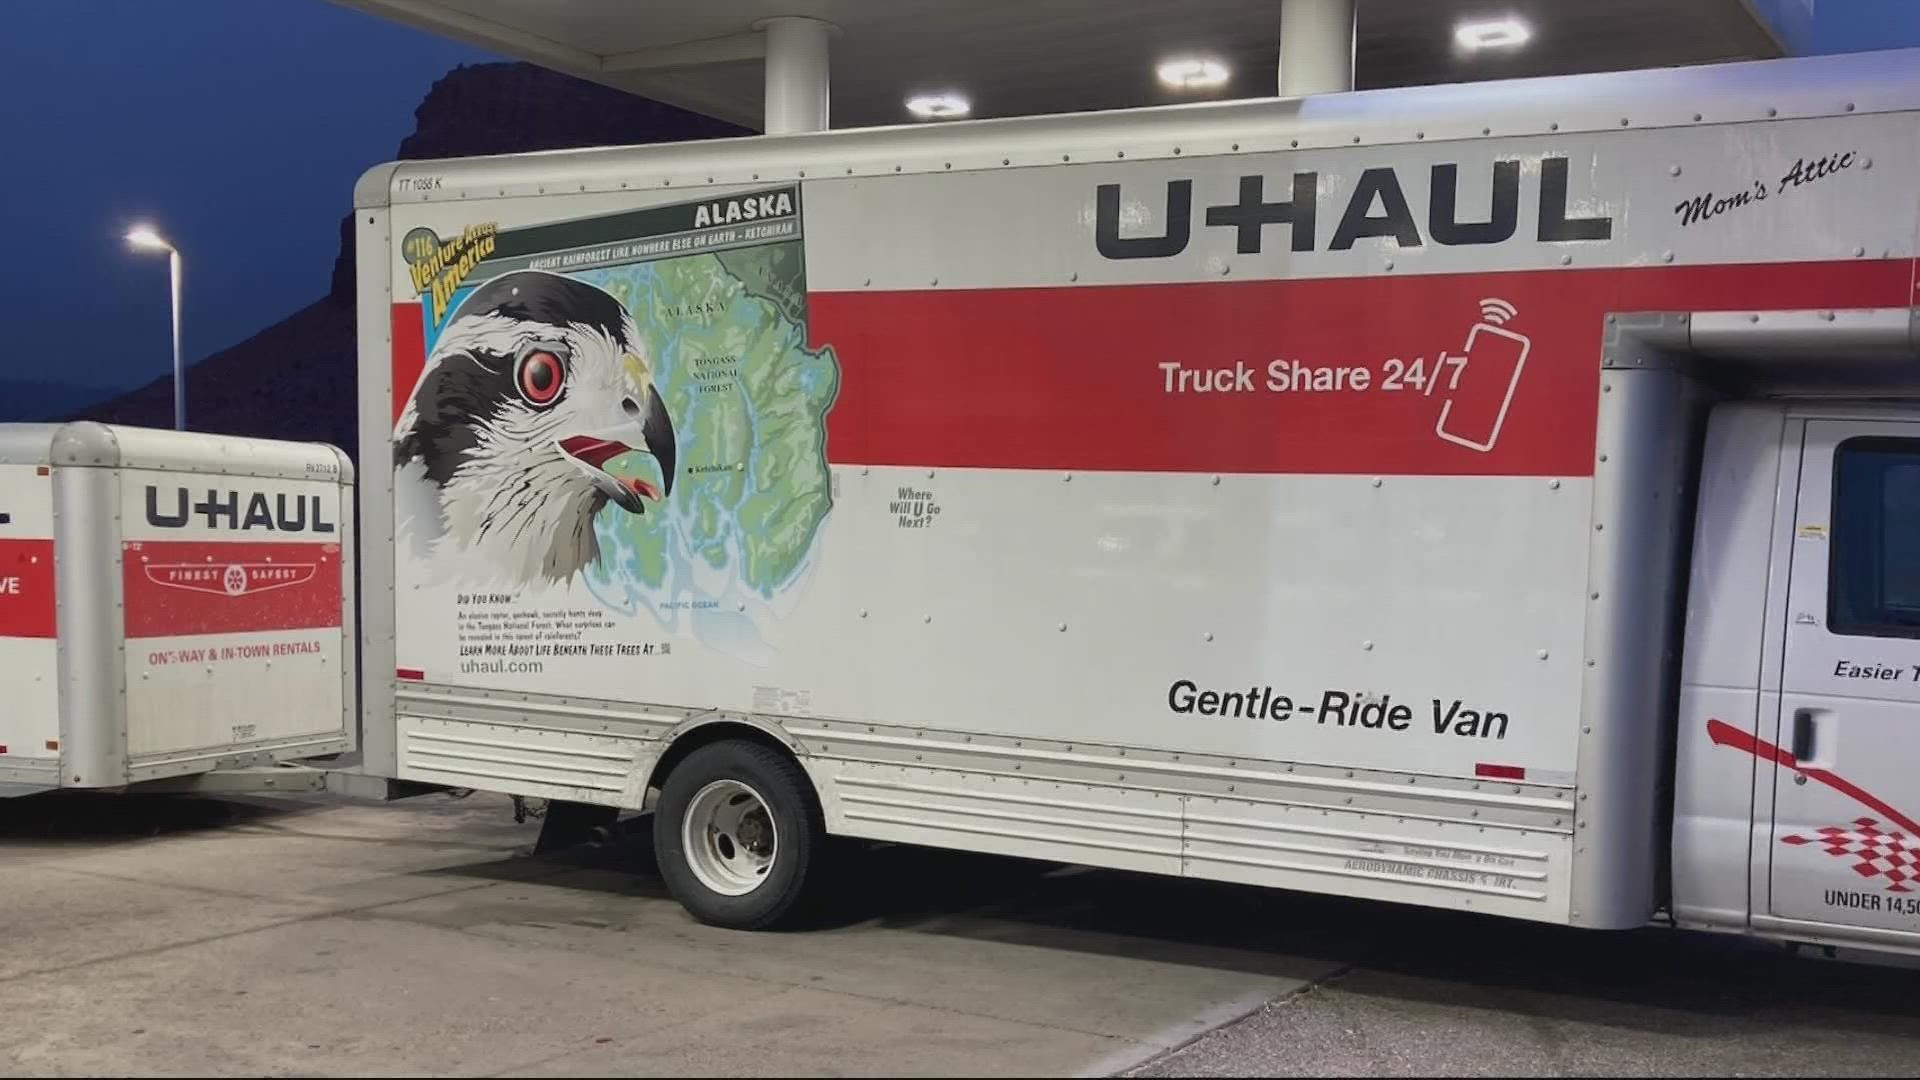 The Multnomah County Sheriff's Office said the fully-loaded U-Haul moving truck and trailer was stolen from outside a Troutdale hotel late Wednesday night.